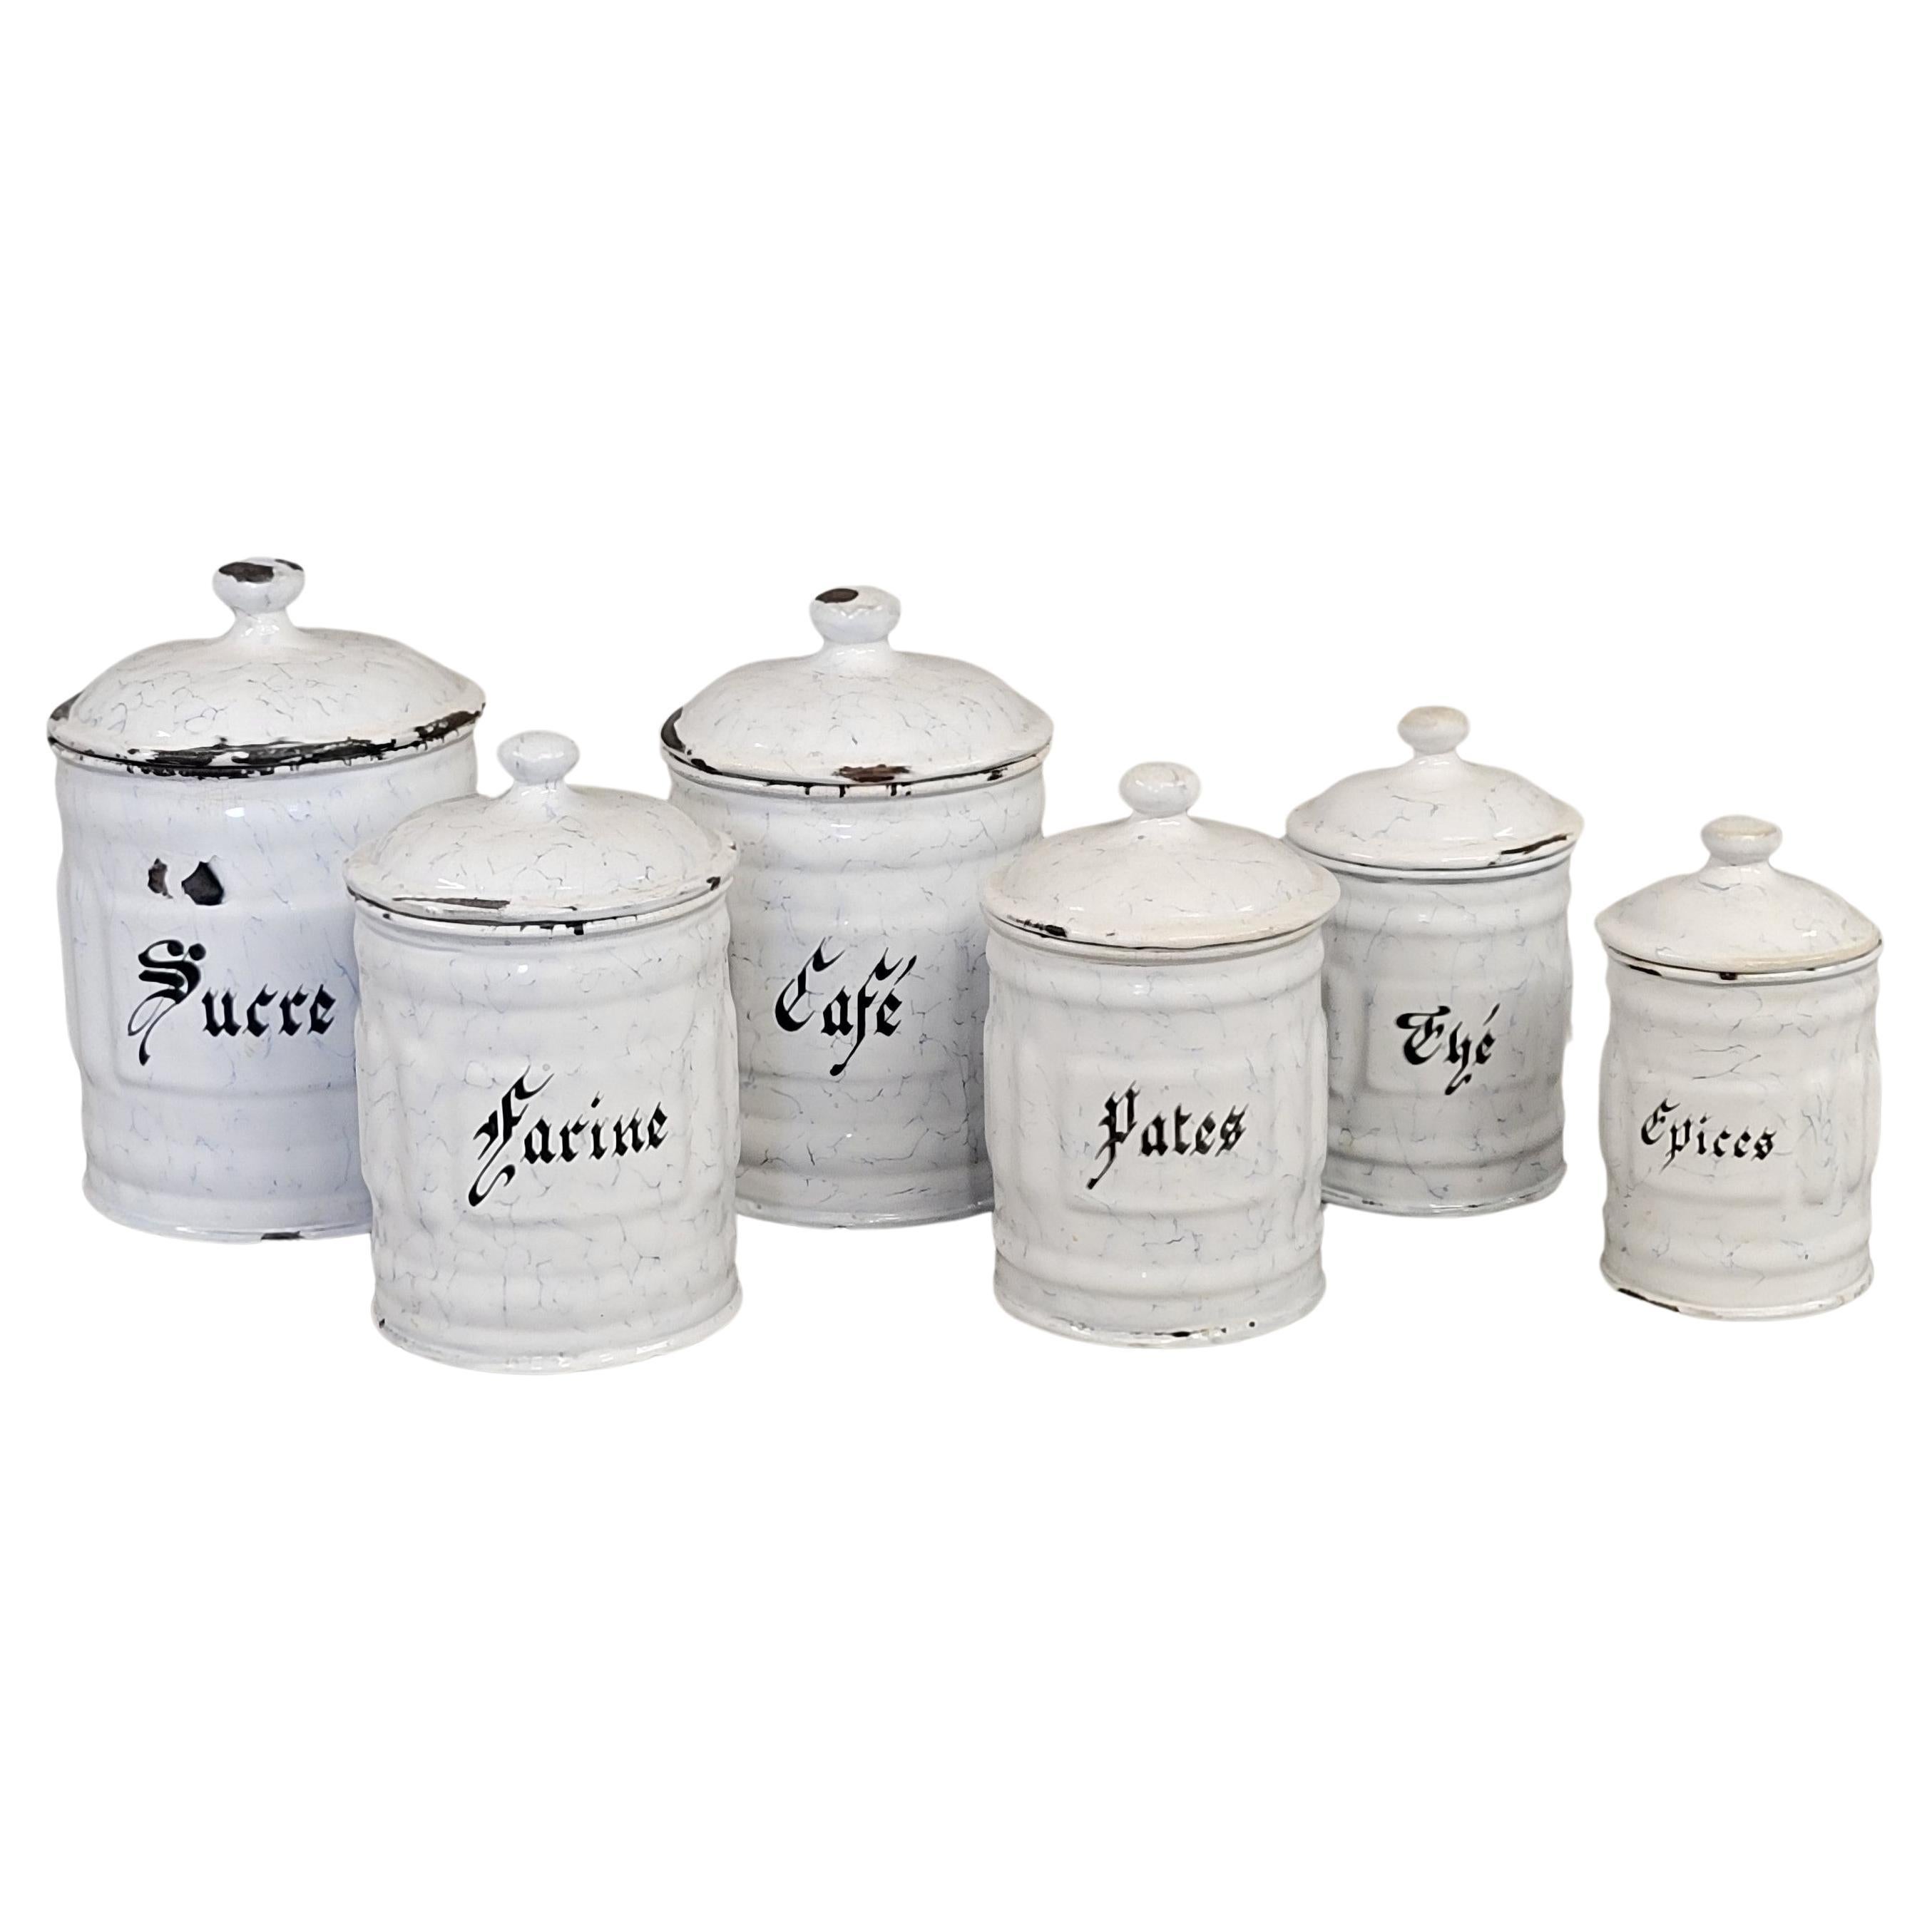 Antique French White and Blue Enamel Canister Set - 6 Pieces For Sale